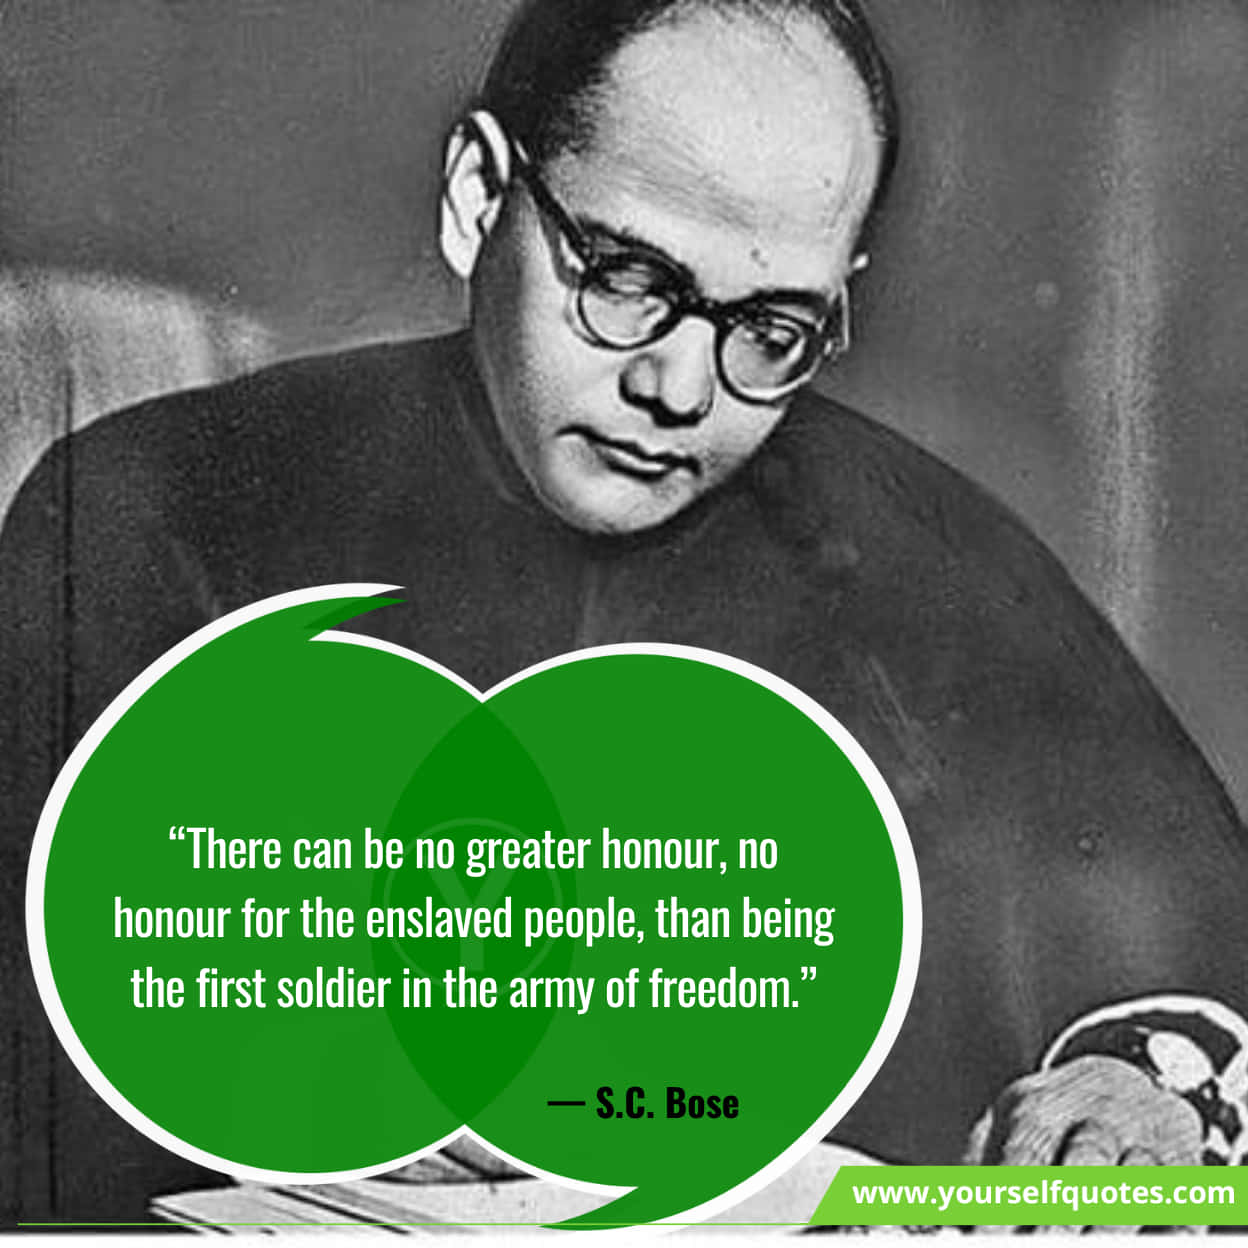 Inspirational Quotes By Subhash Chandra Bose